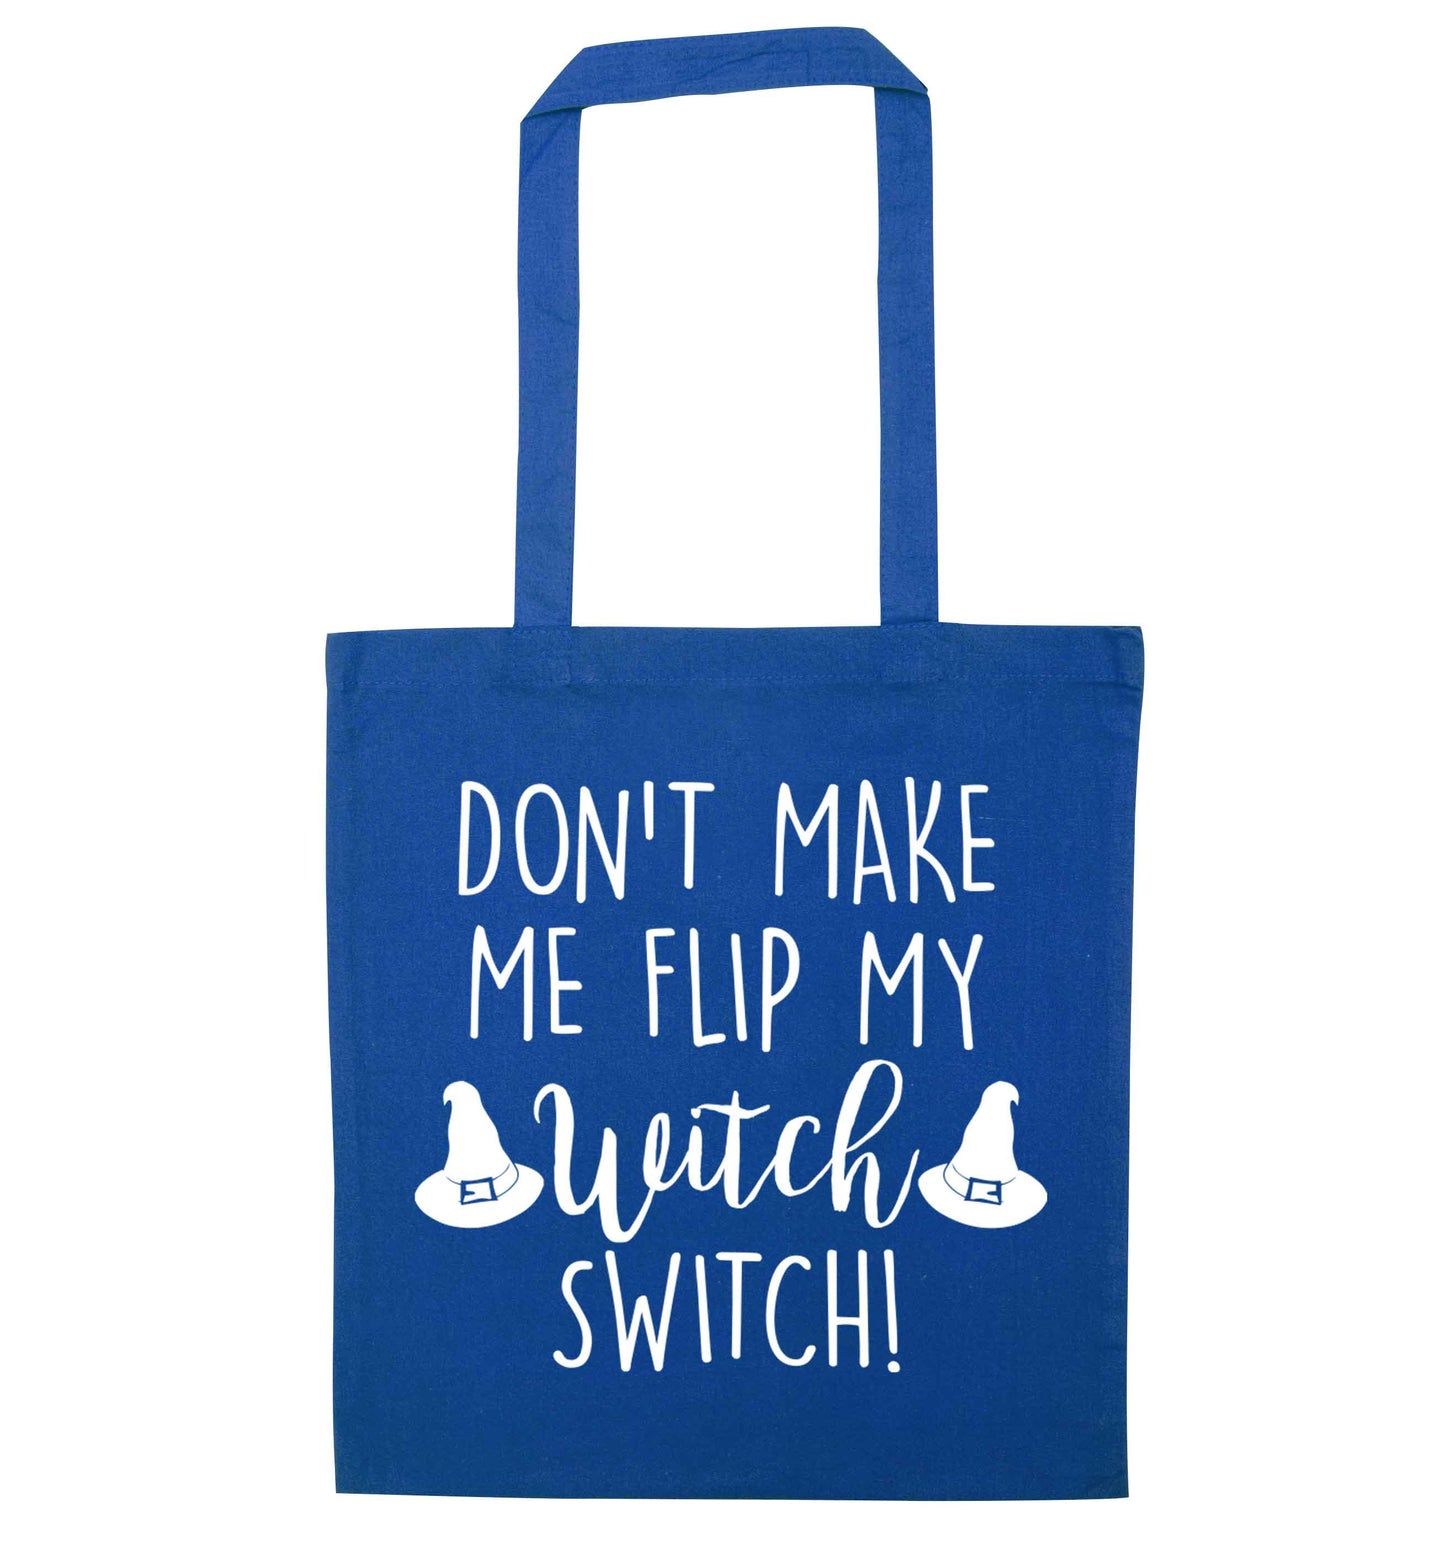 Don't make me flip my witch switch blue tote bag